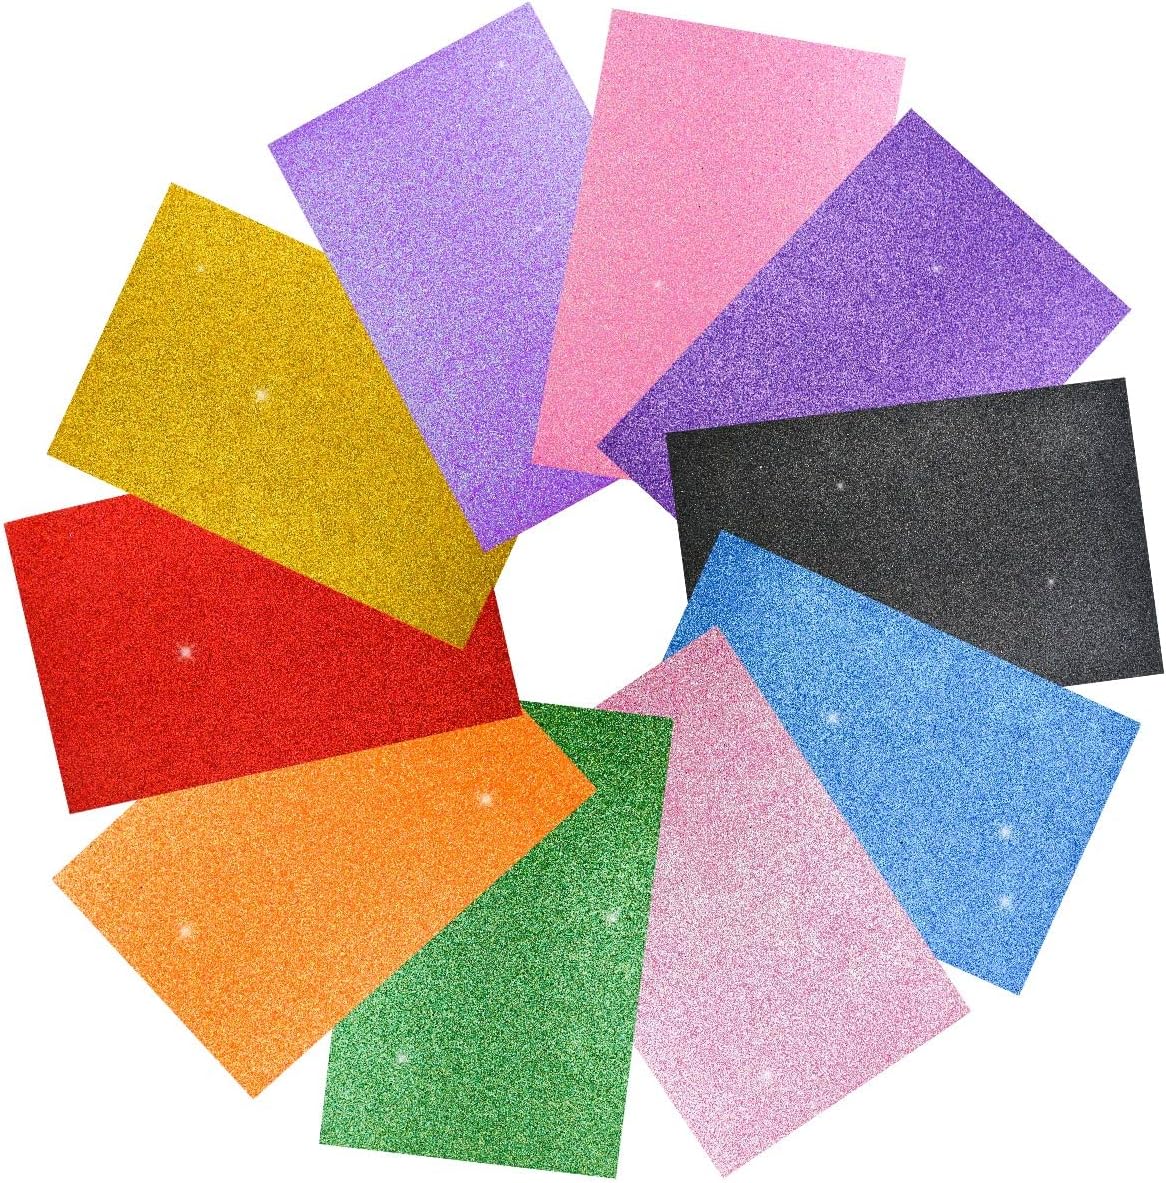 10 Pack Assorted Colors EVA Foam Sheets Glitter Foam Paper for Craft DIY Glitter Cardstock Paper Perfect for Kids Art Projects Classroom Arts Crafts Cosplay Party 2mm Thick (7.87 X 11.8 Inches)